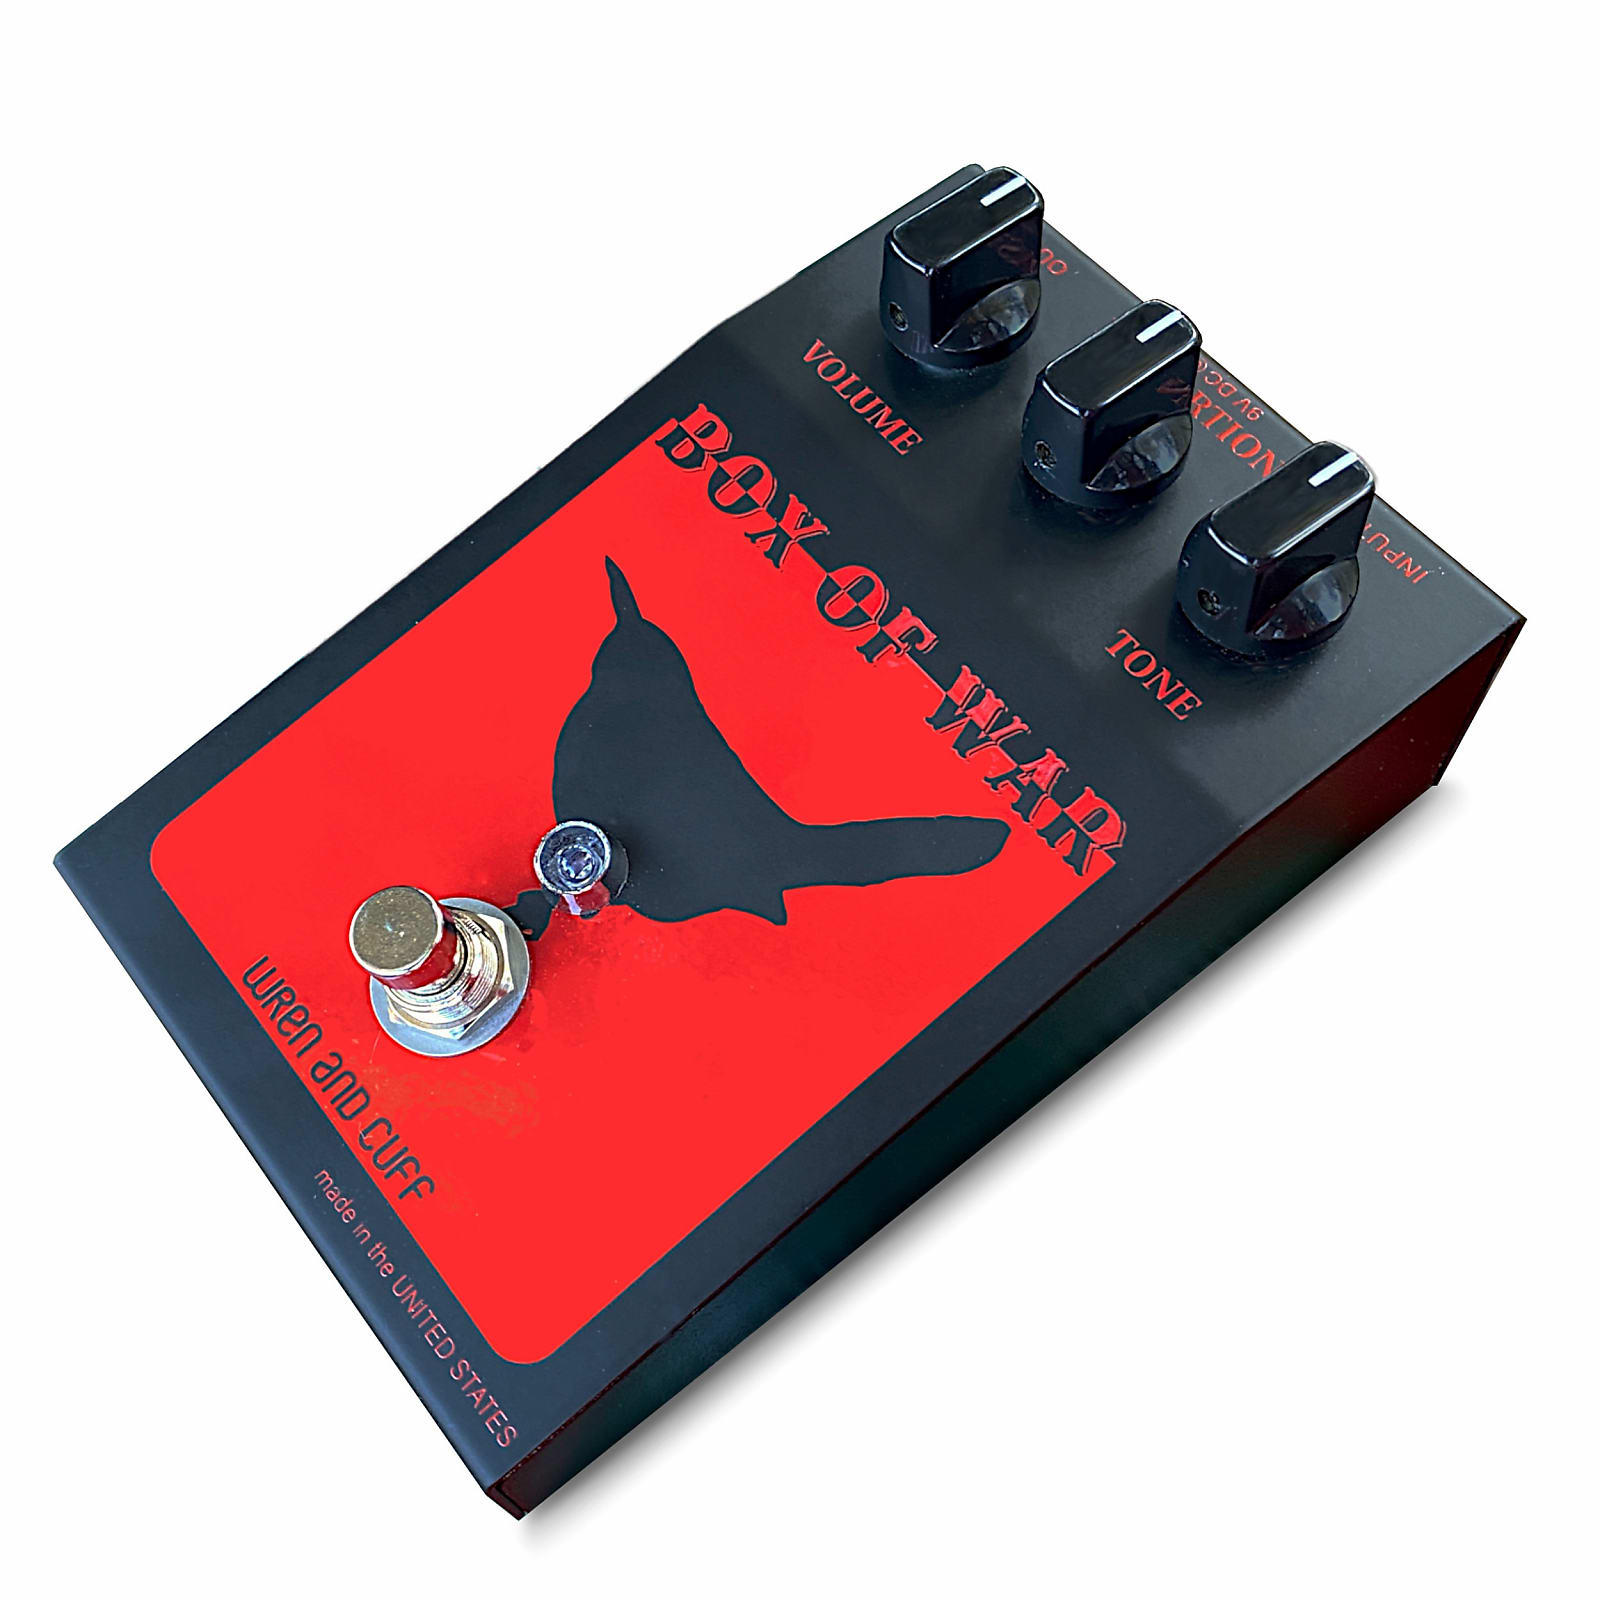 Wren and Cuff OG Box of War Fuzz Effects Pedal Black / Red Special Edition